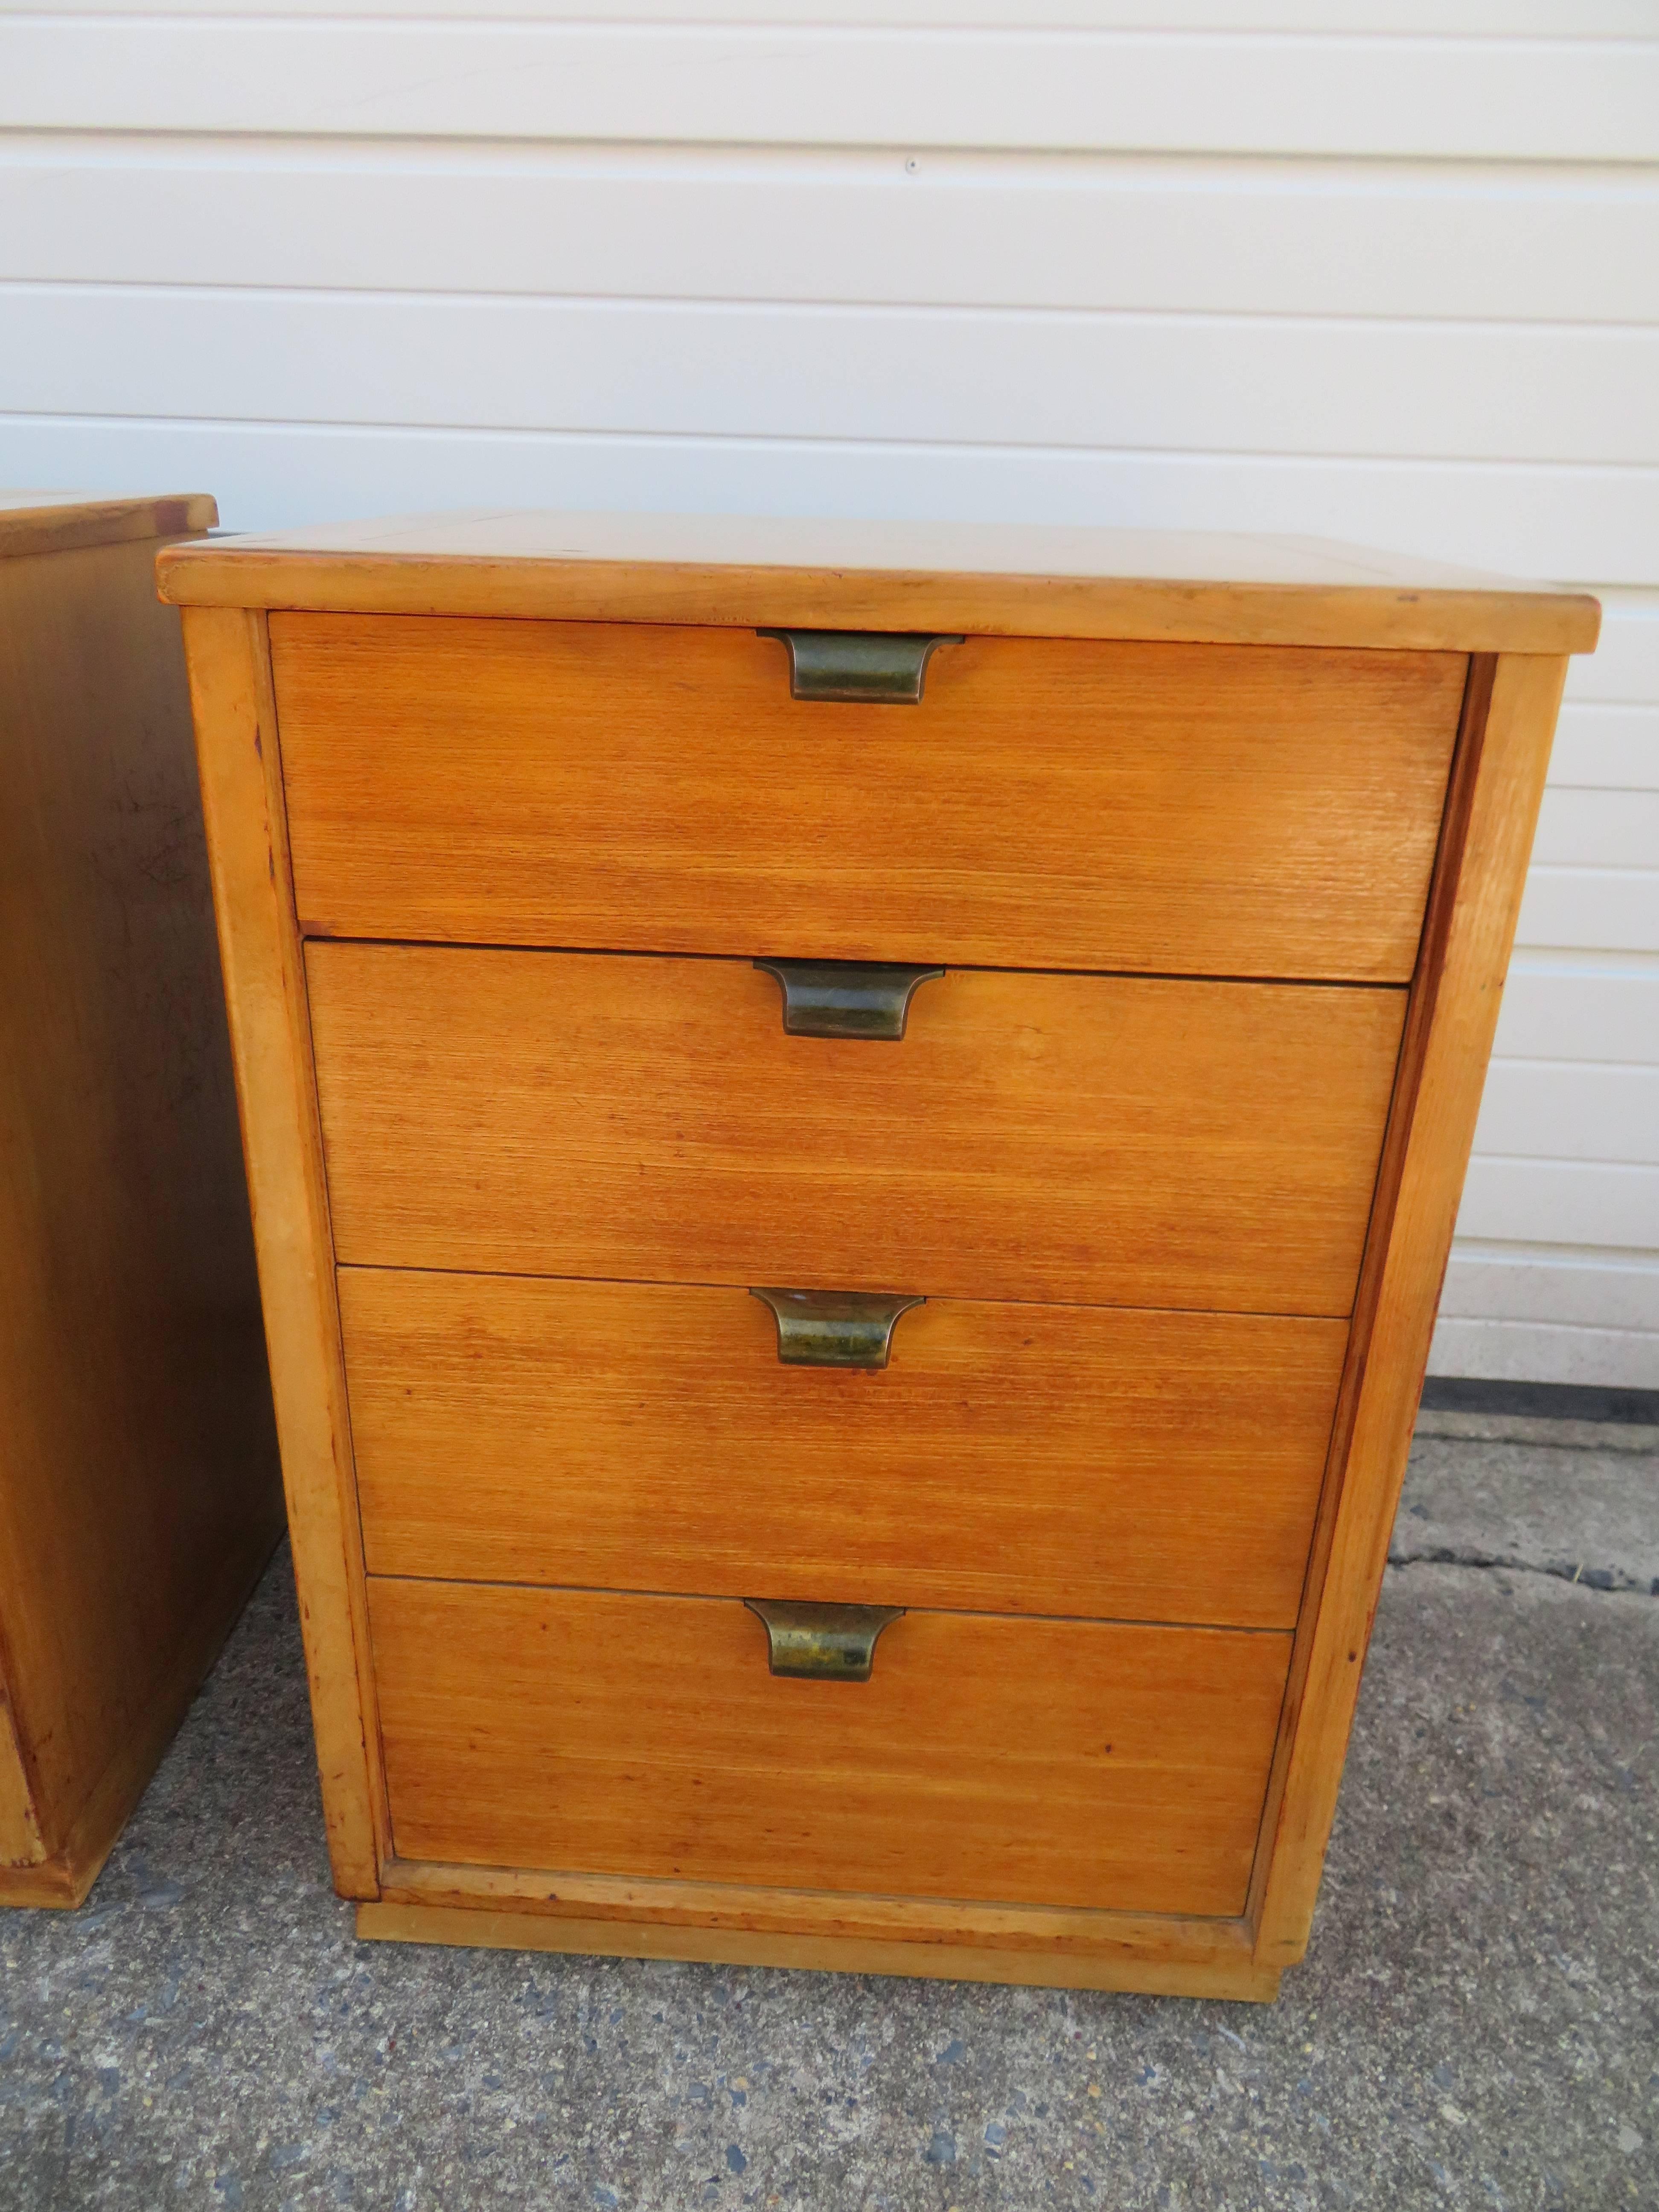 Plated Lovely Pair of Edward Wormley for Drexel Precedent Nightstand Mid-Century Modern For Sale